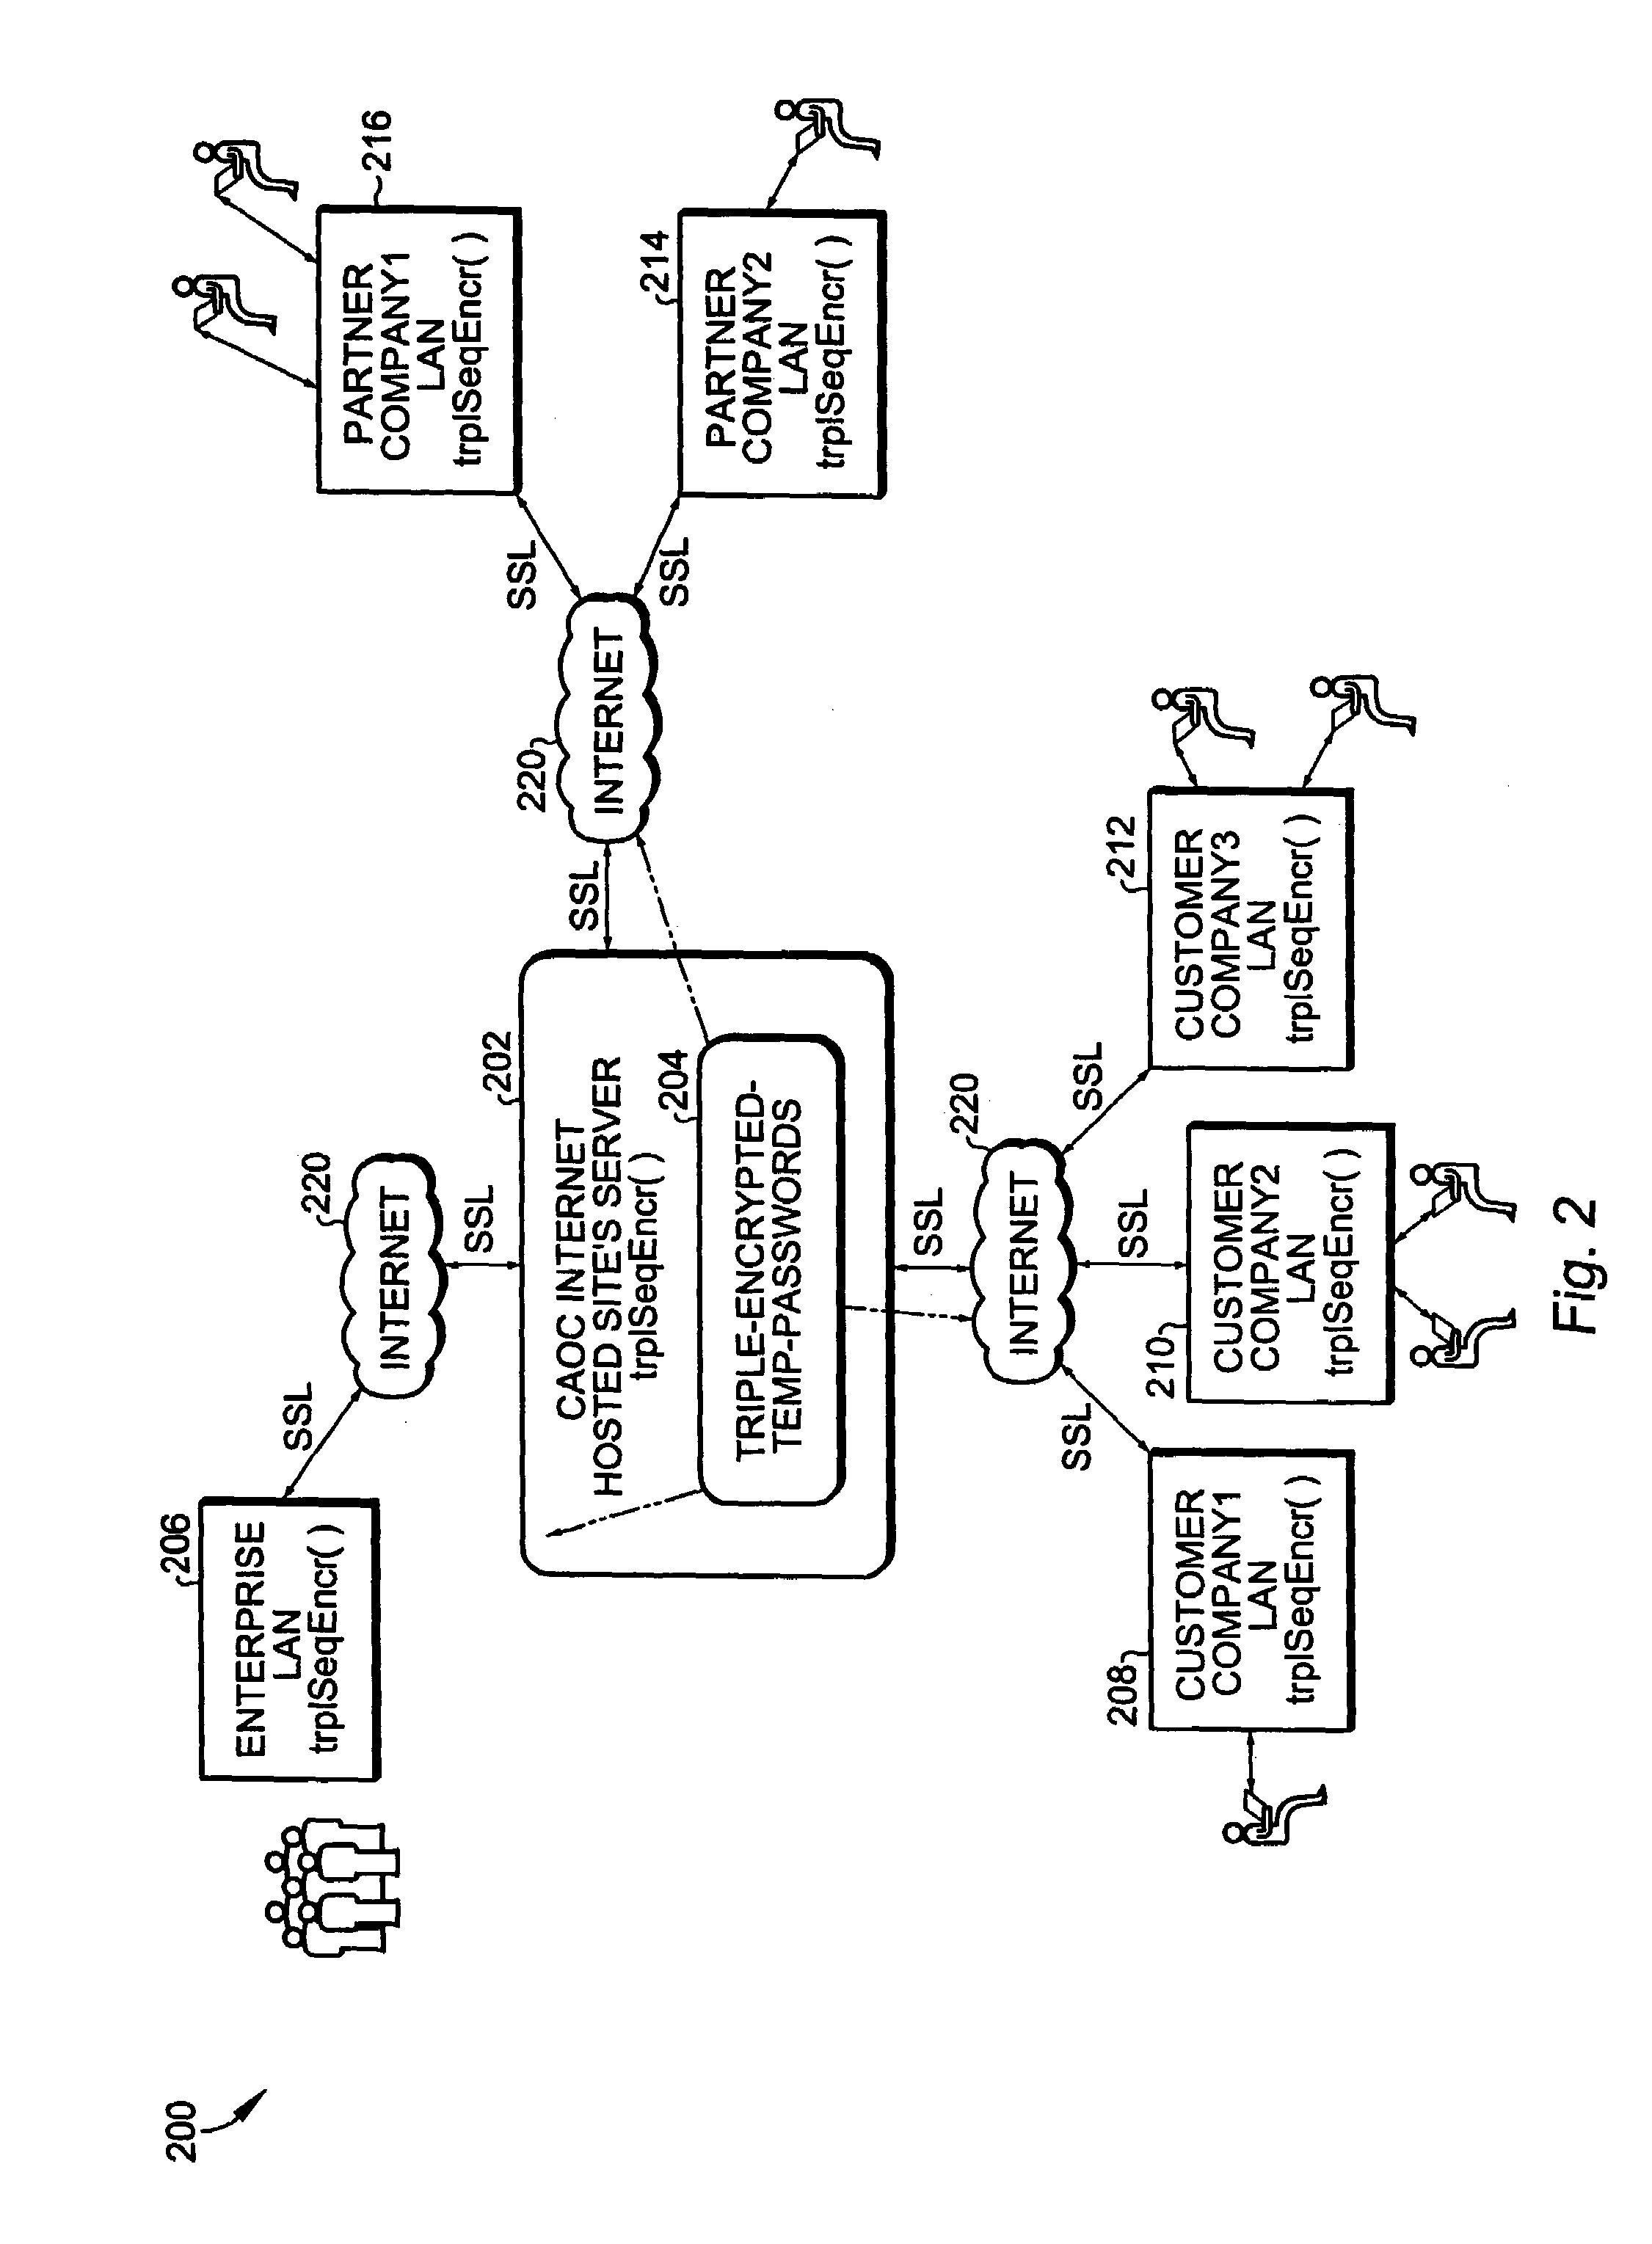 Methods and apparatus for persistence of authentication and authorization for a multi-tenant internet hosted site using cookies